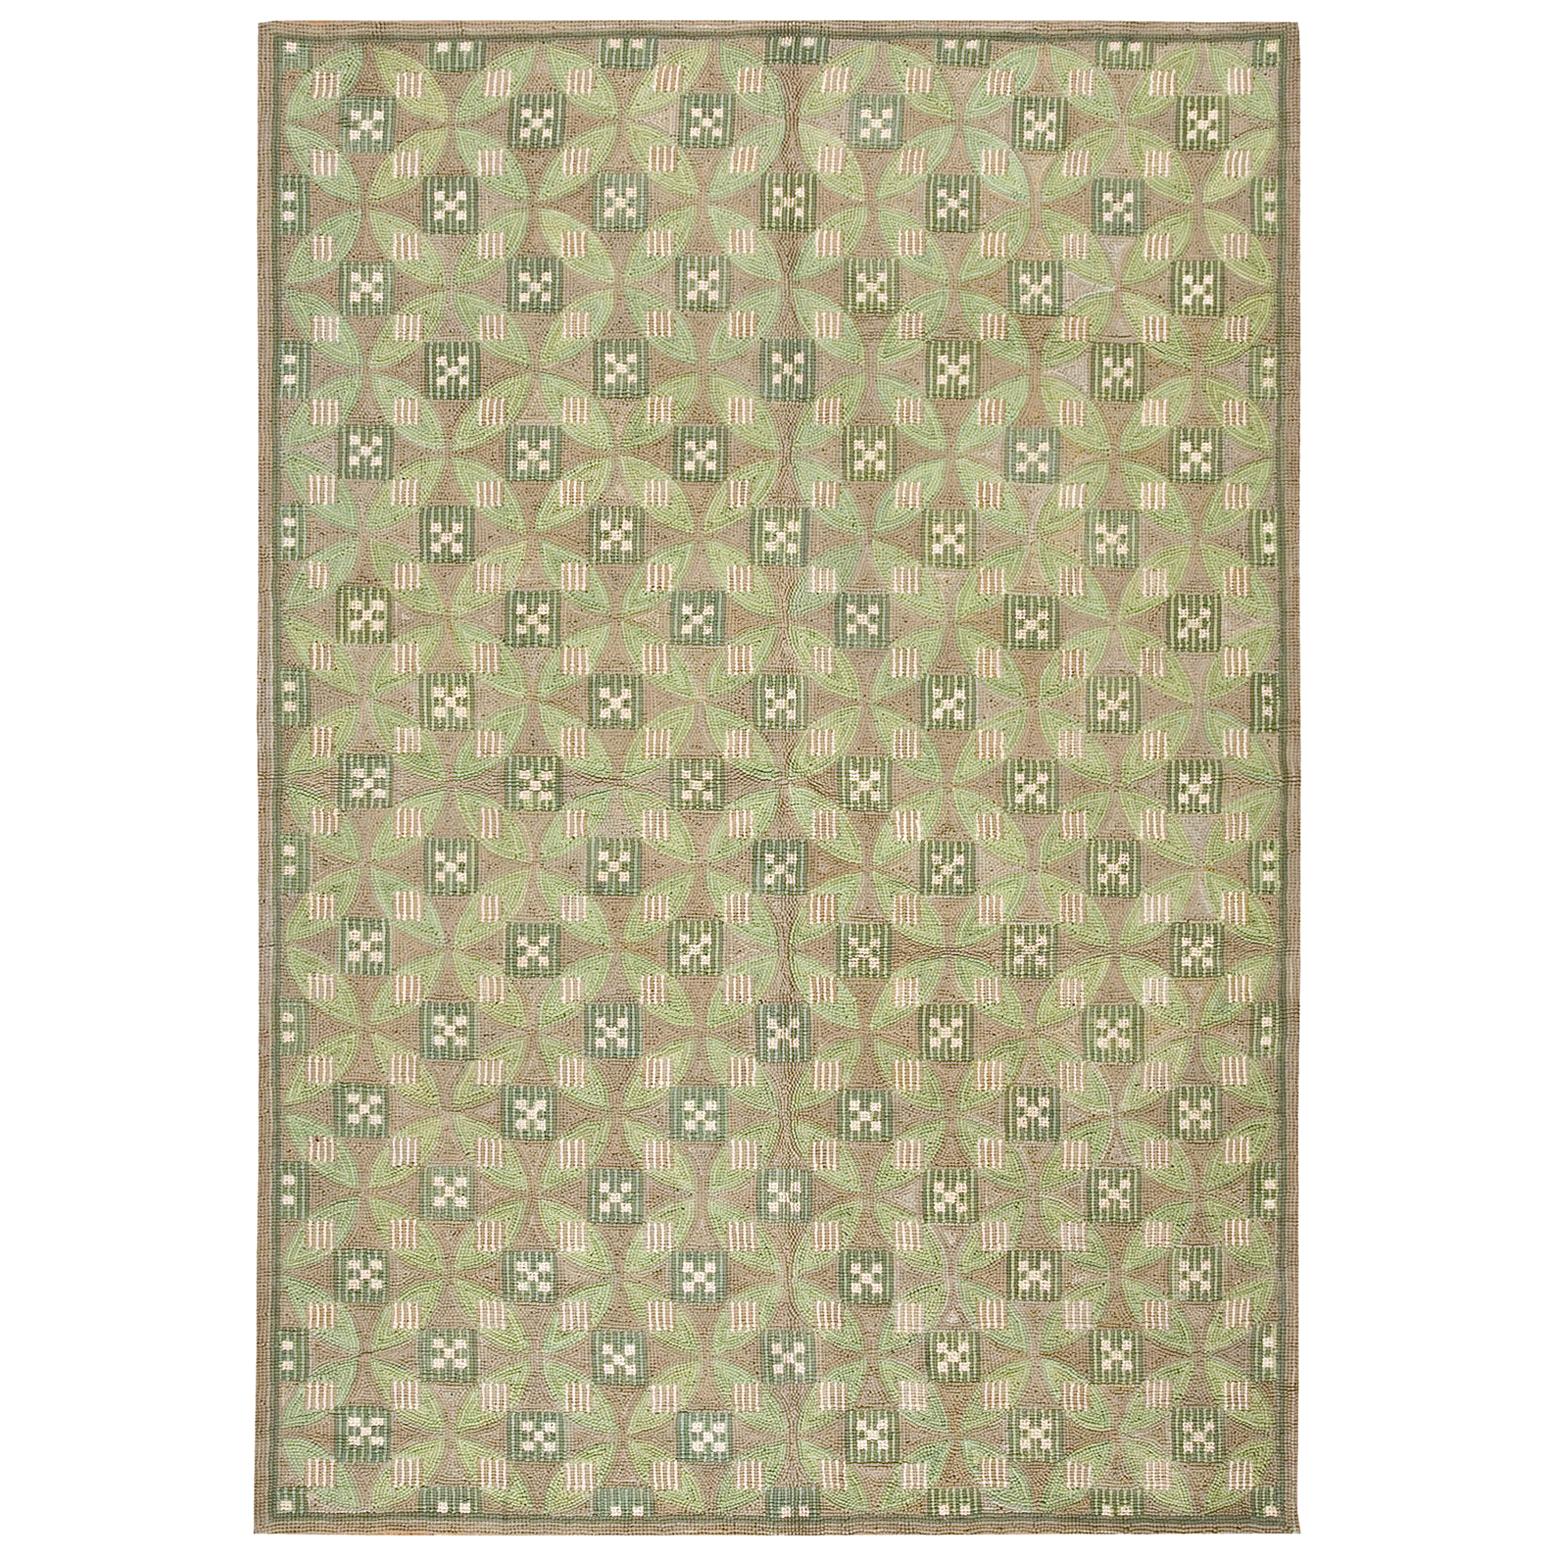 Contemporary American Hooked Rug (6' x 9' - 183x 274)